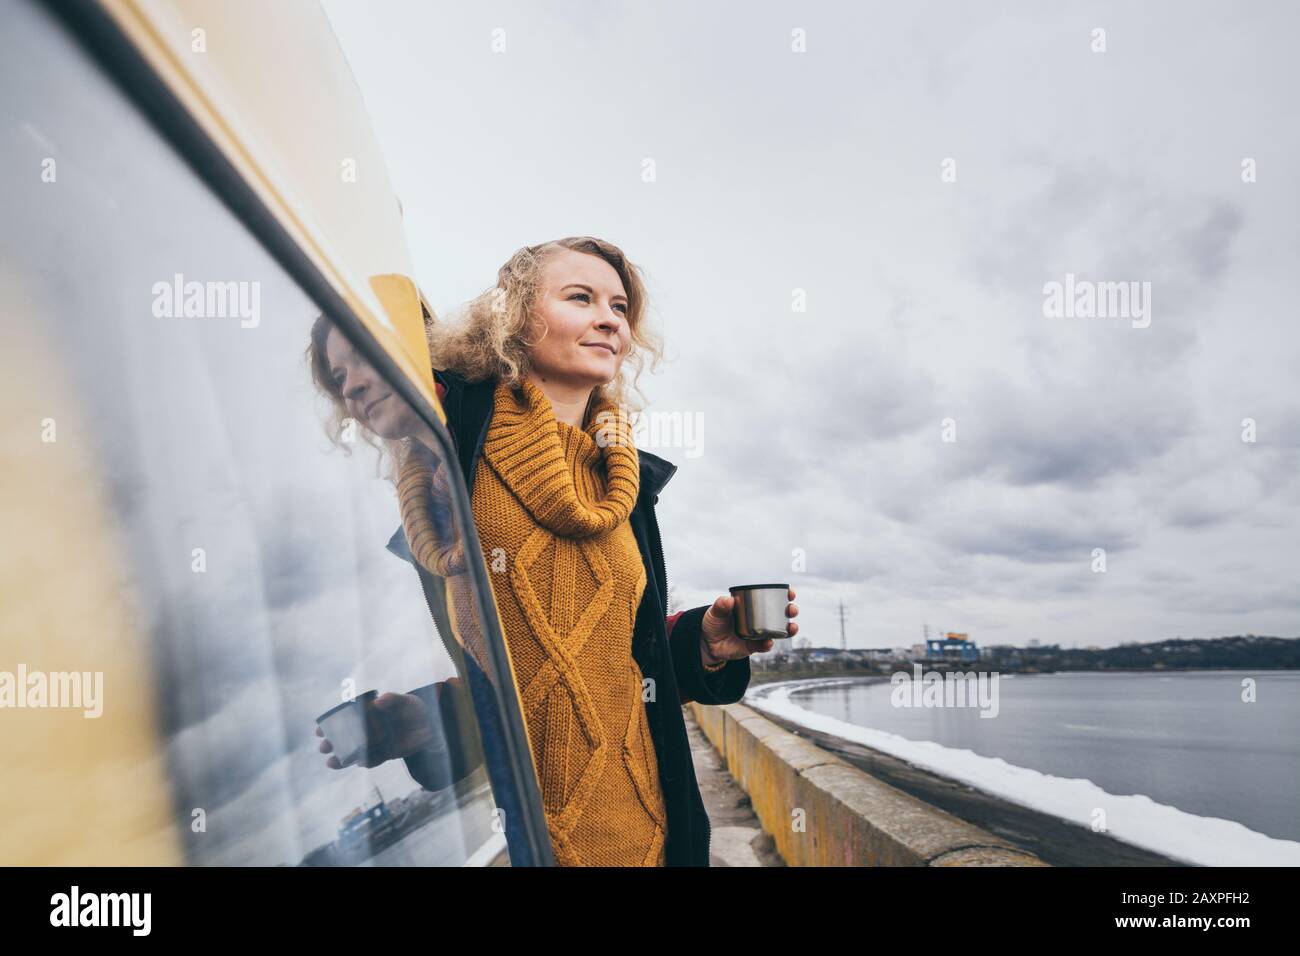 Young blond woman looking out of camper van overlooking the frozen winter sea. Reflection in the car window. Stock Photo